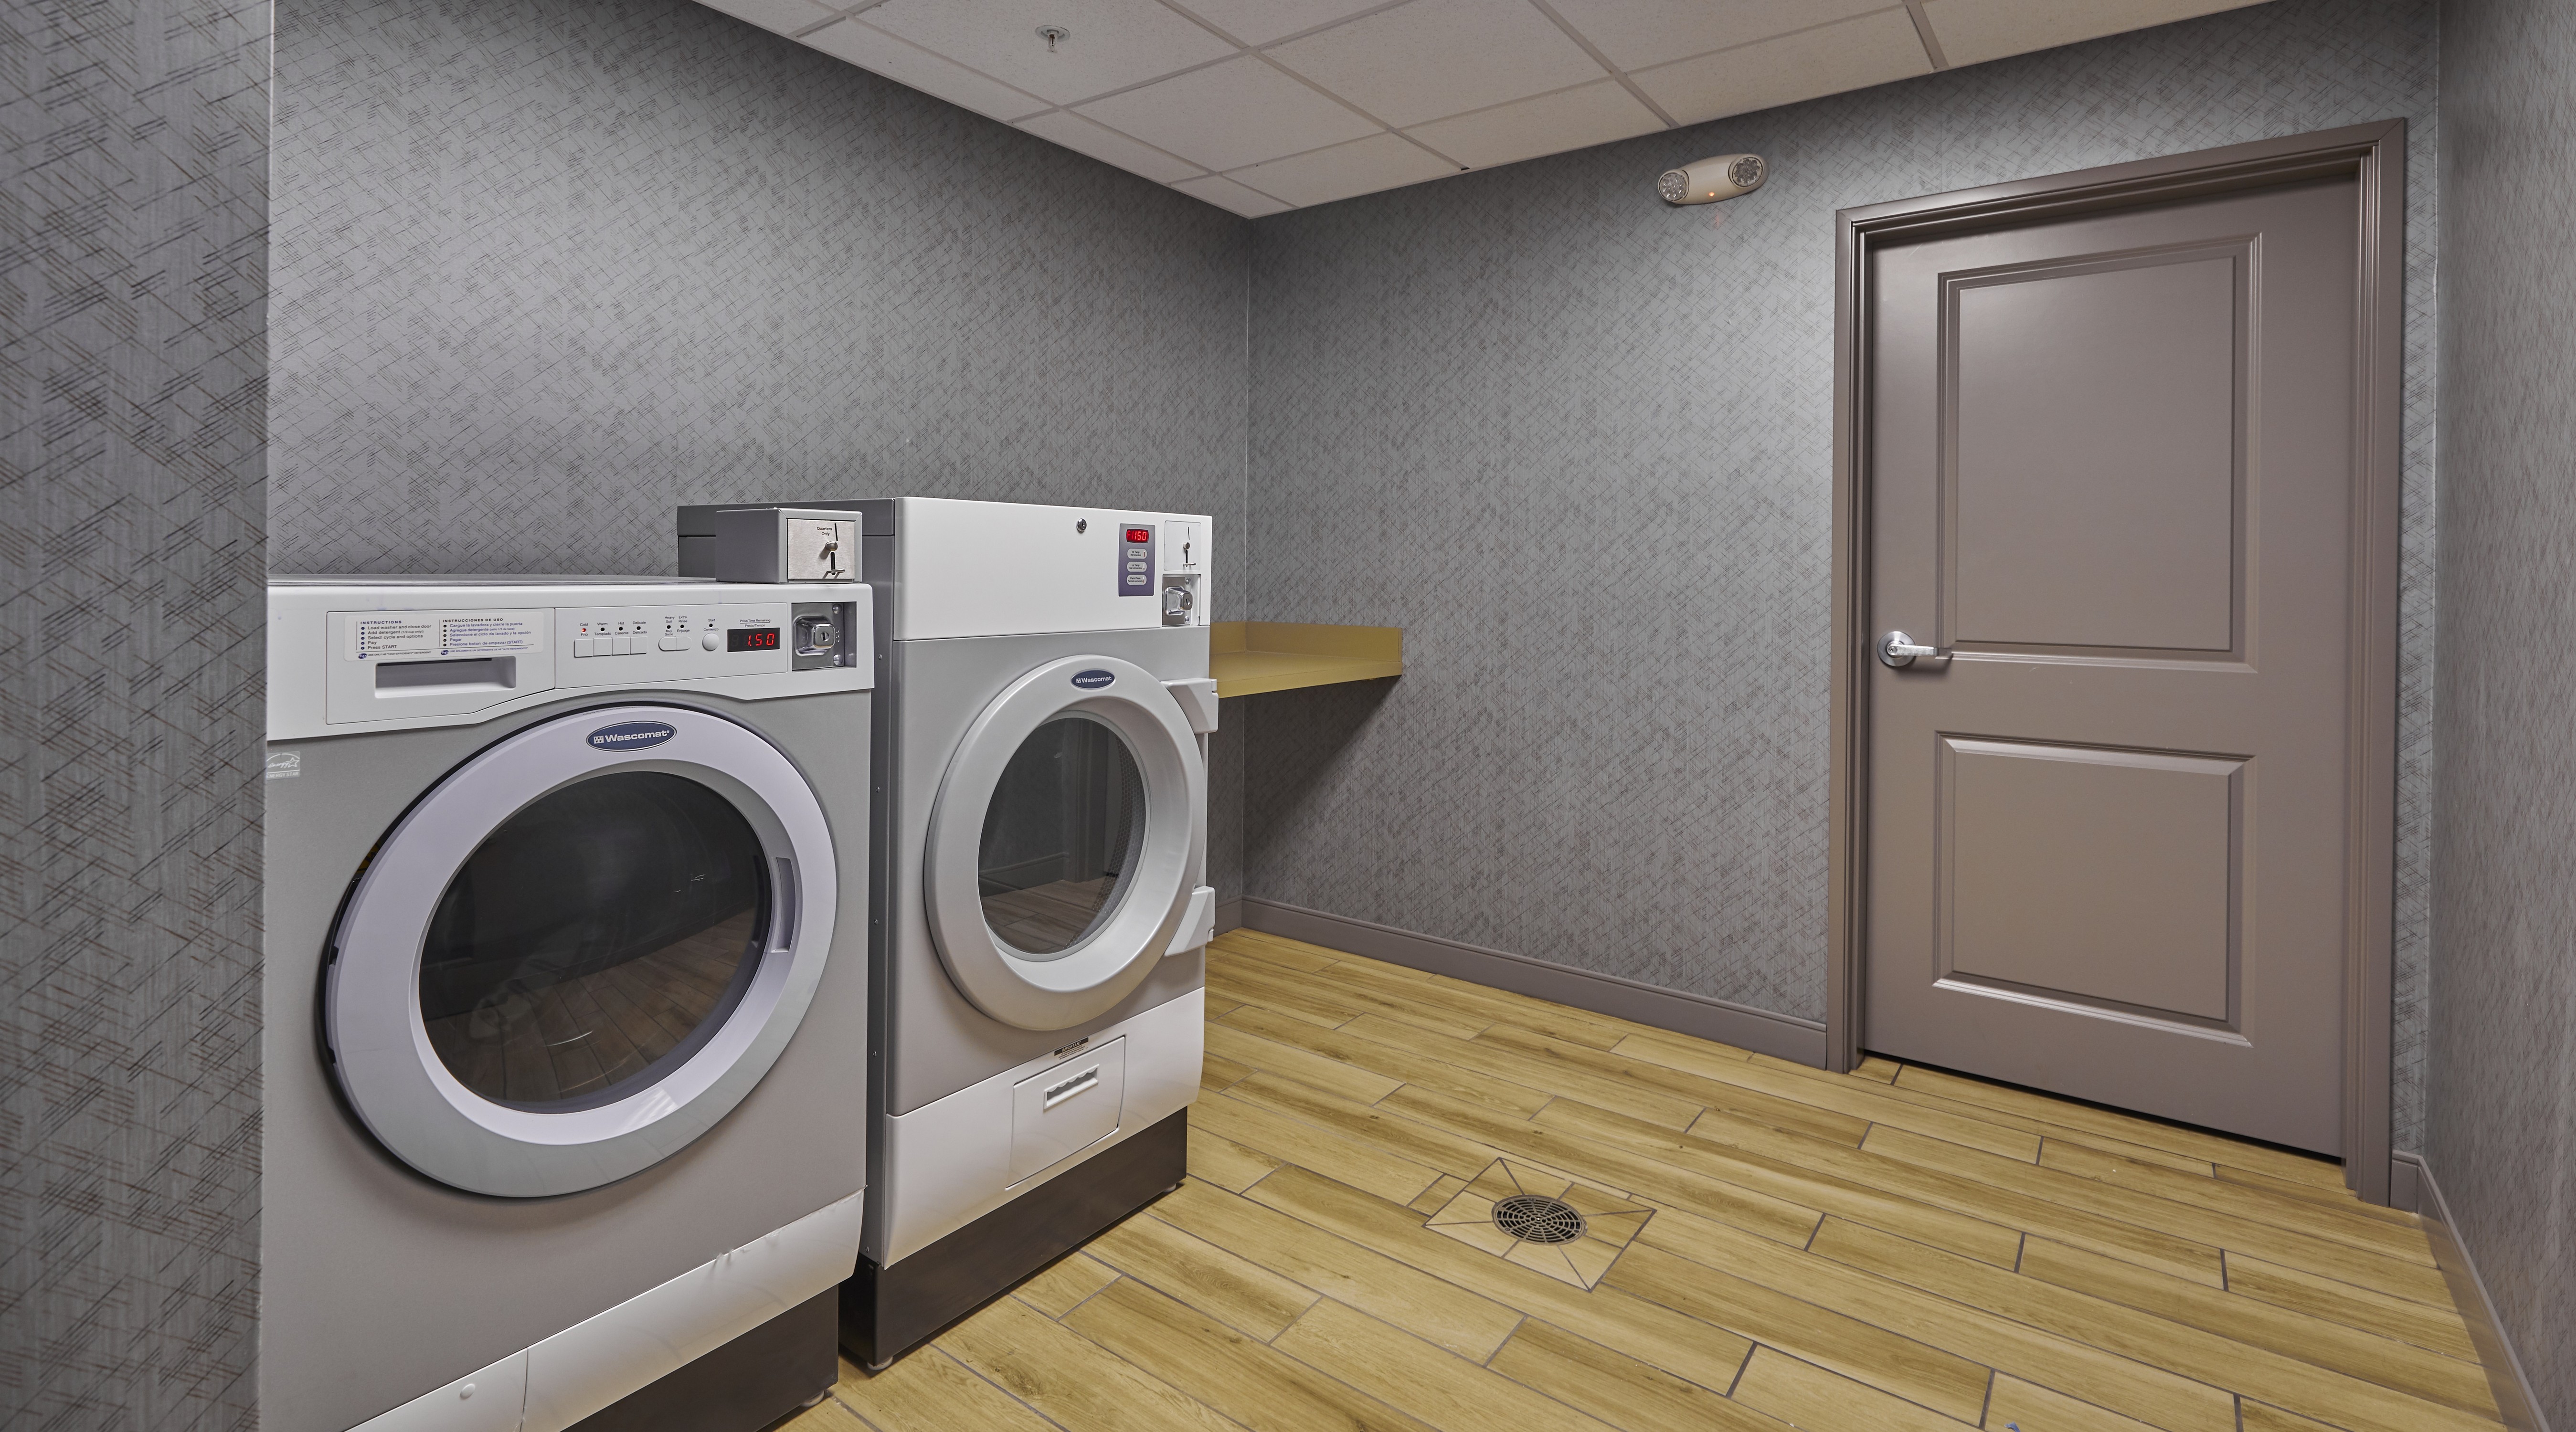 Laundry Room with Coin Operated Machines for Guest Use